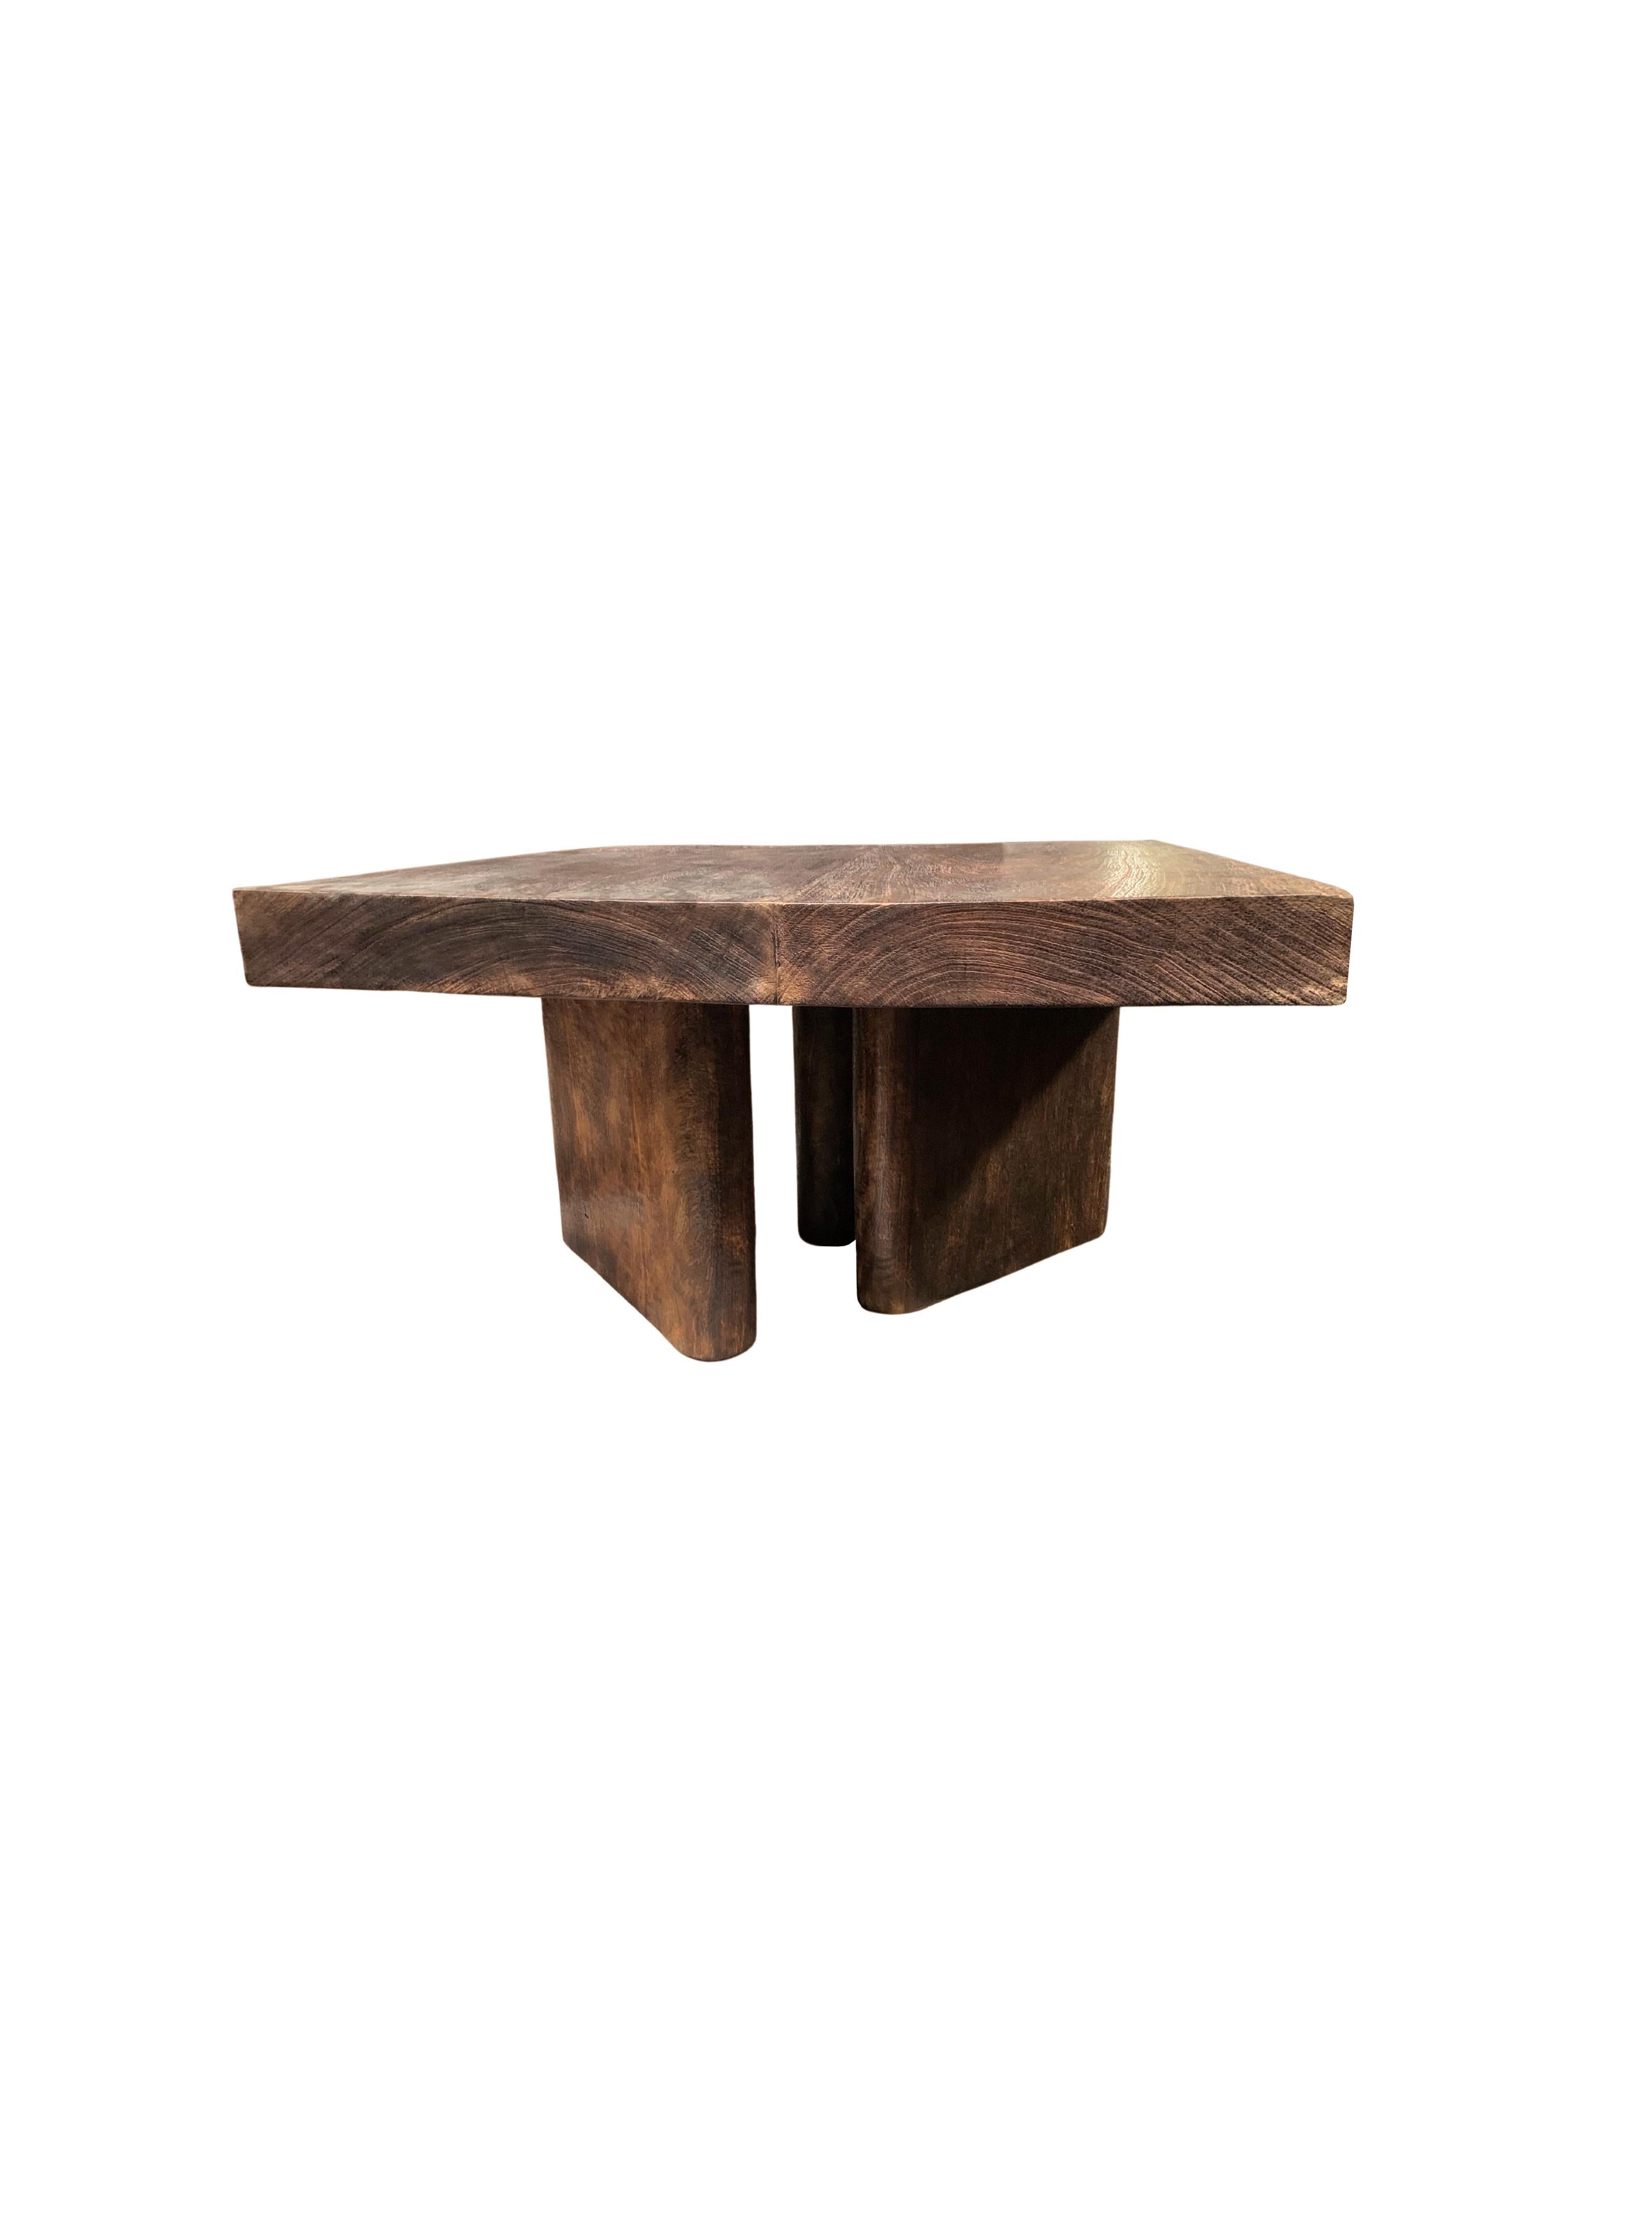 Other Sculptural Mango Wood Table Espresso Finish Modern Organic For Sale